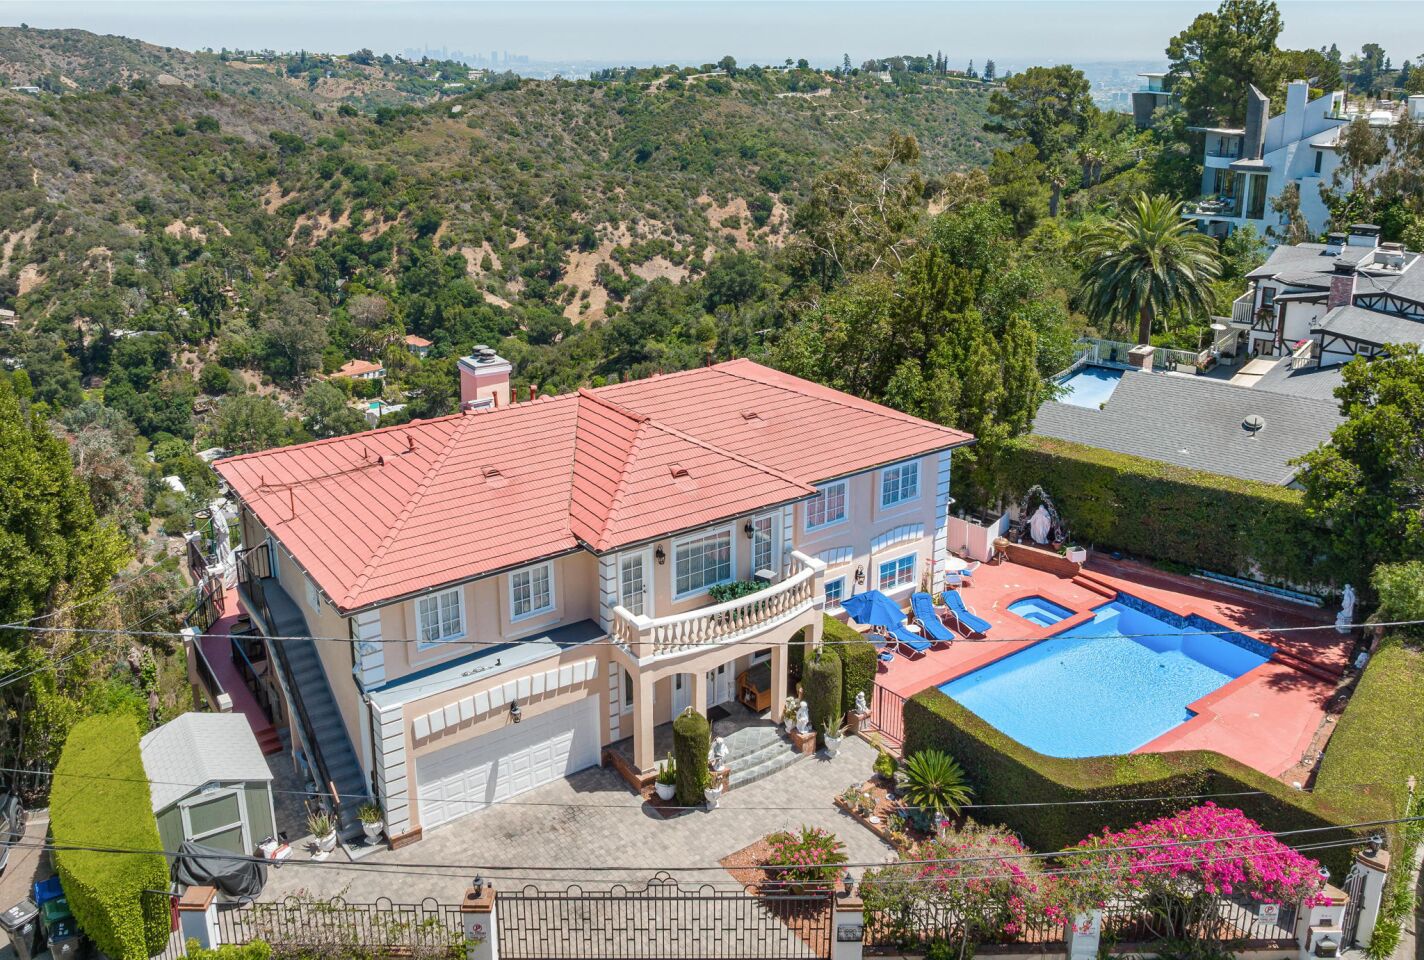 The 1980s home in an aerial view of the house, pool and surrounding greenery.